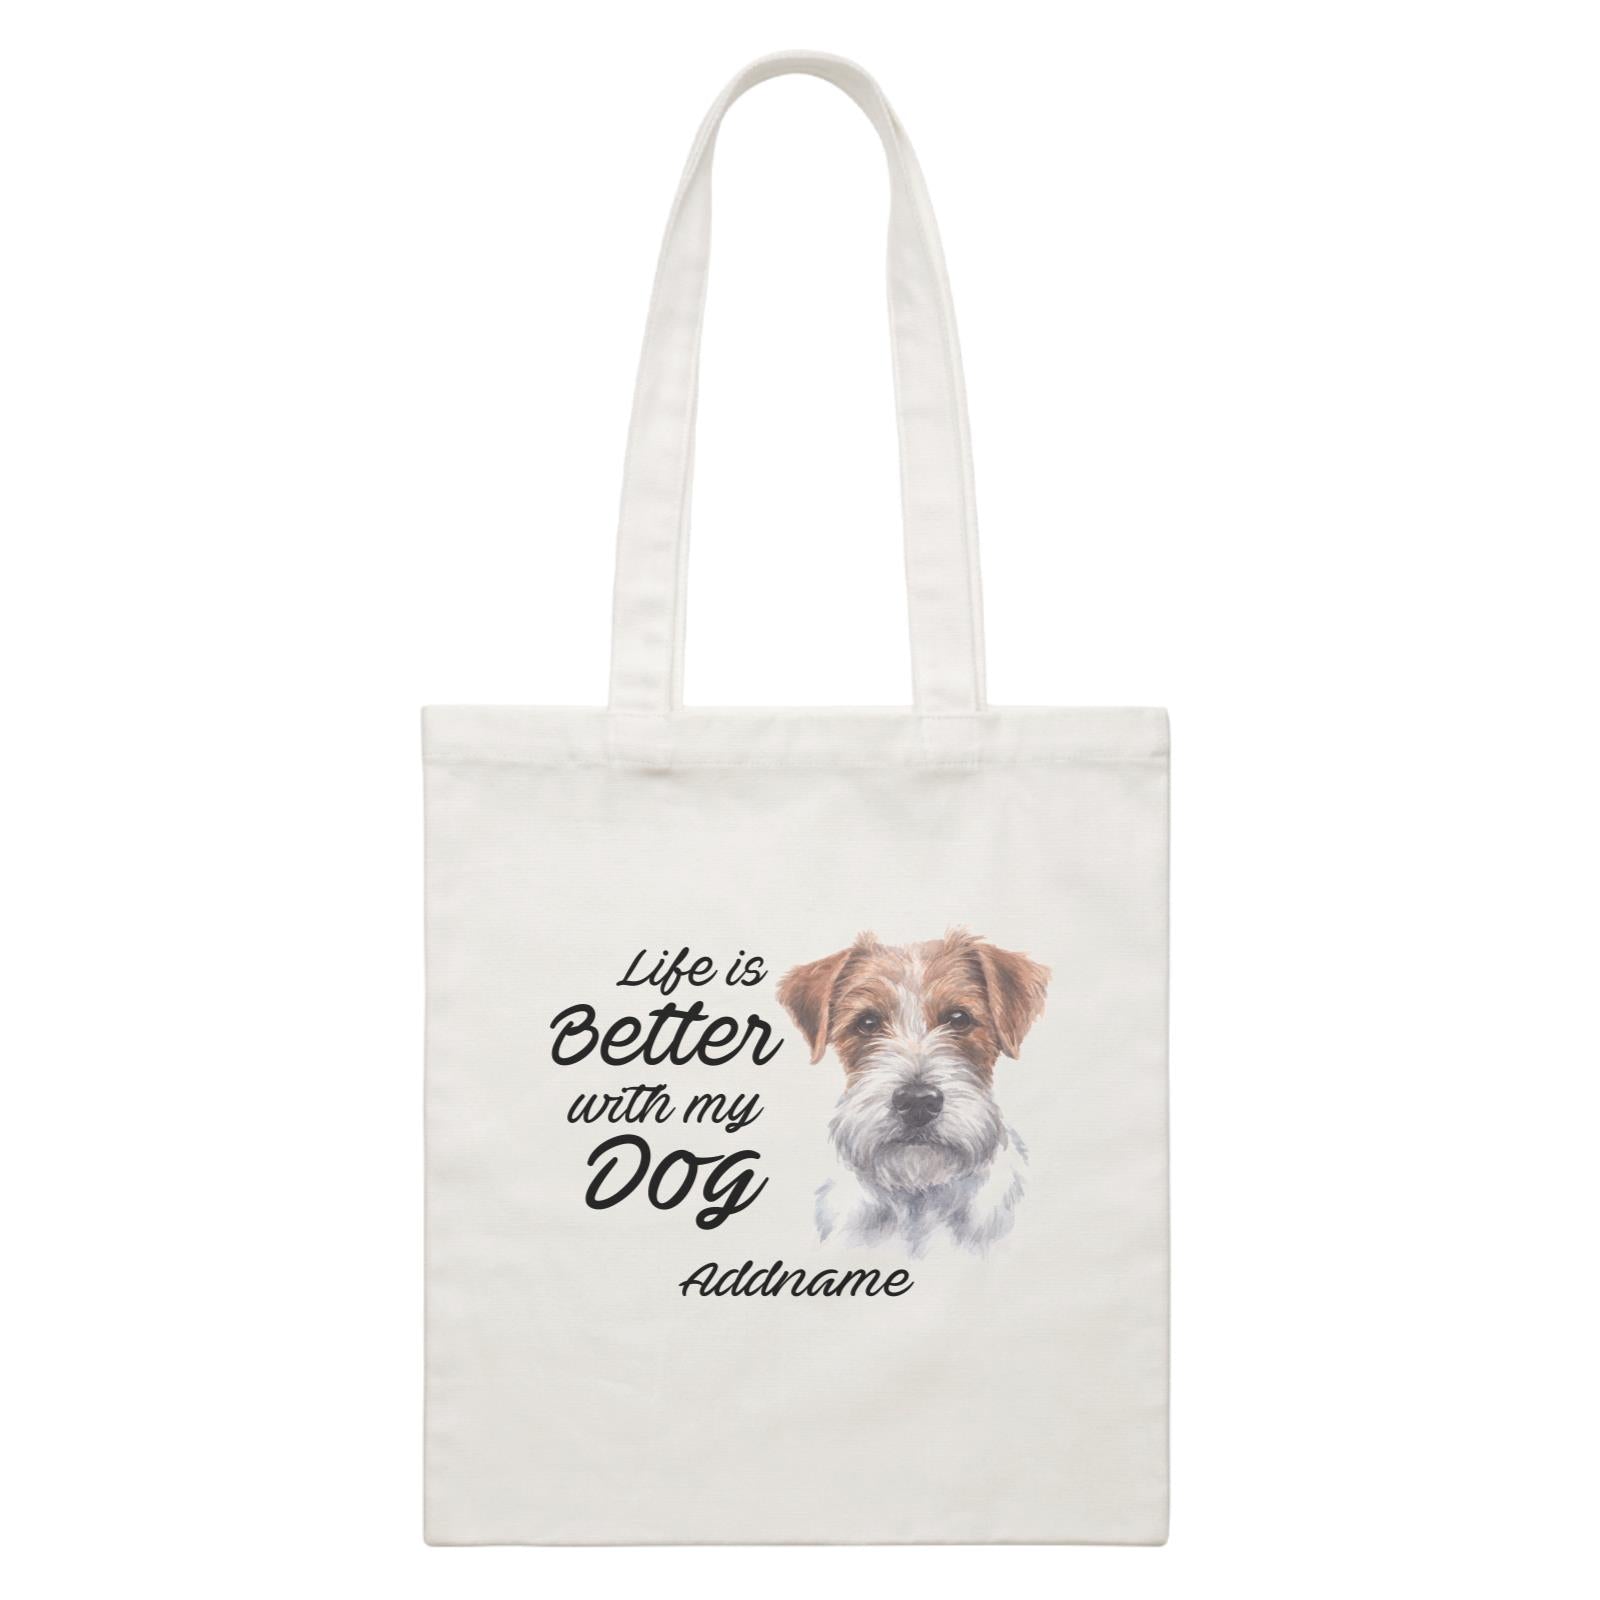 Watercolor Life is Better With My Dog Jack Russell Long Hair Addname White Canvas Bag